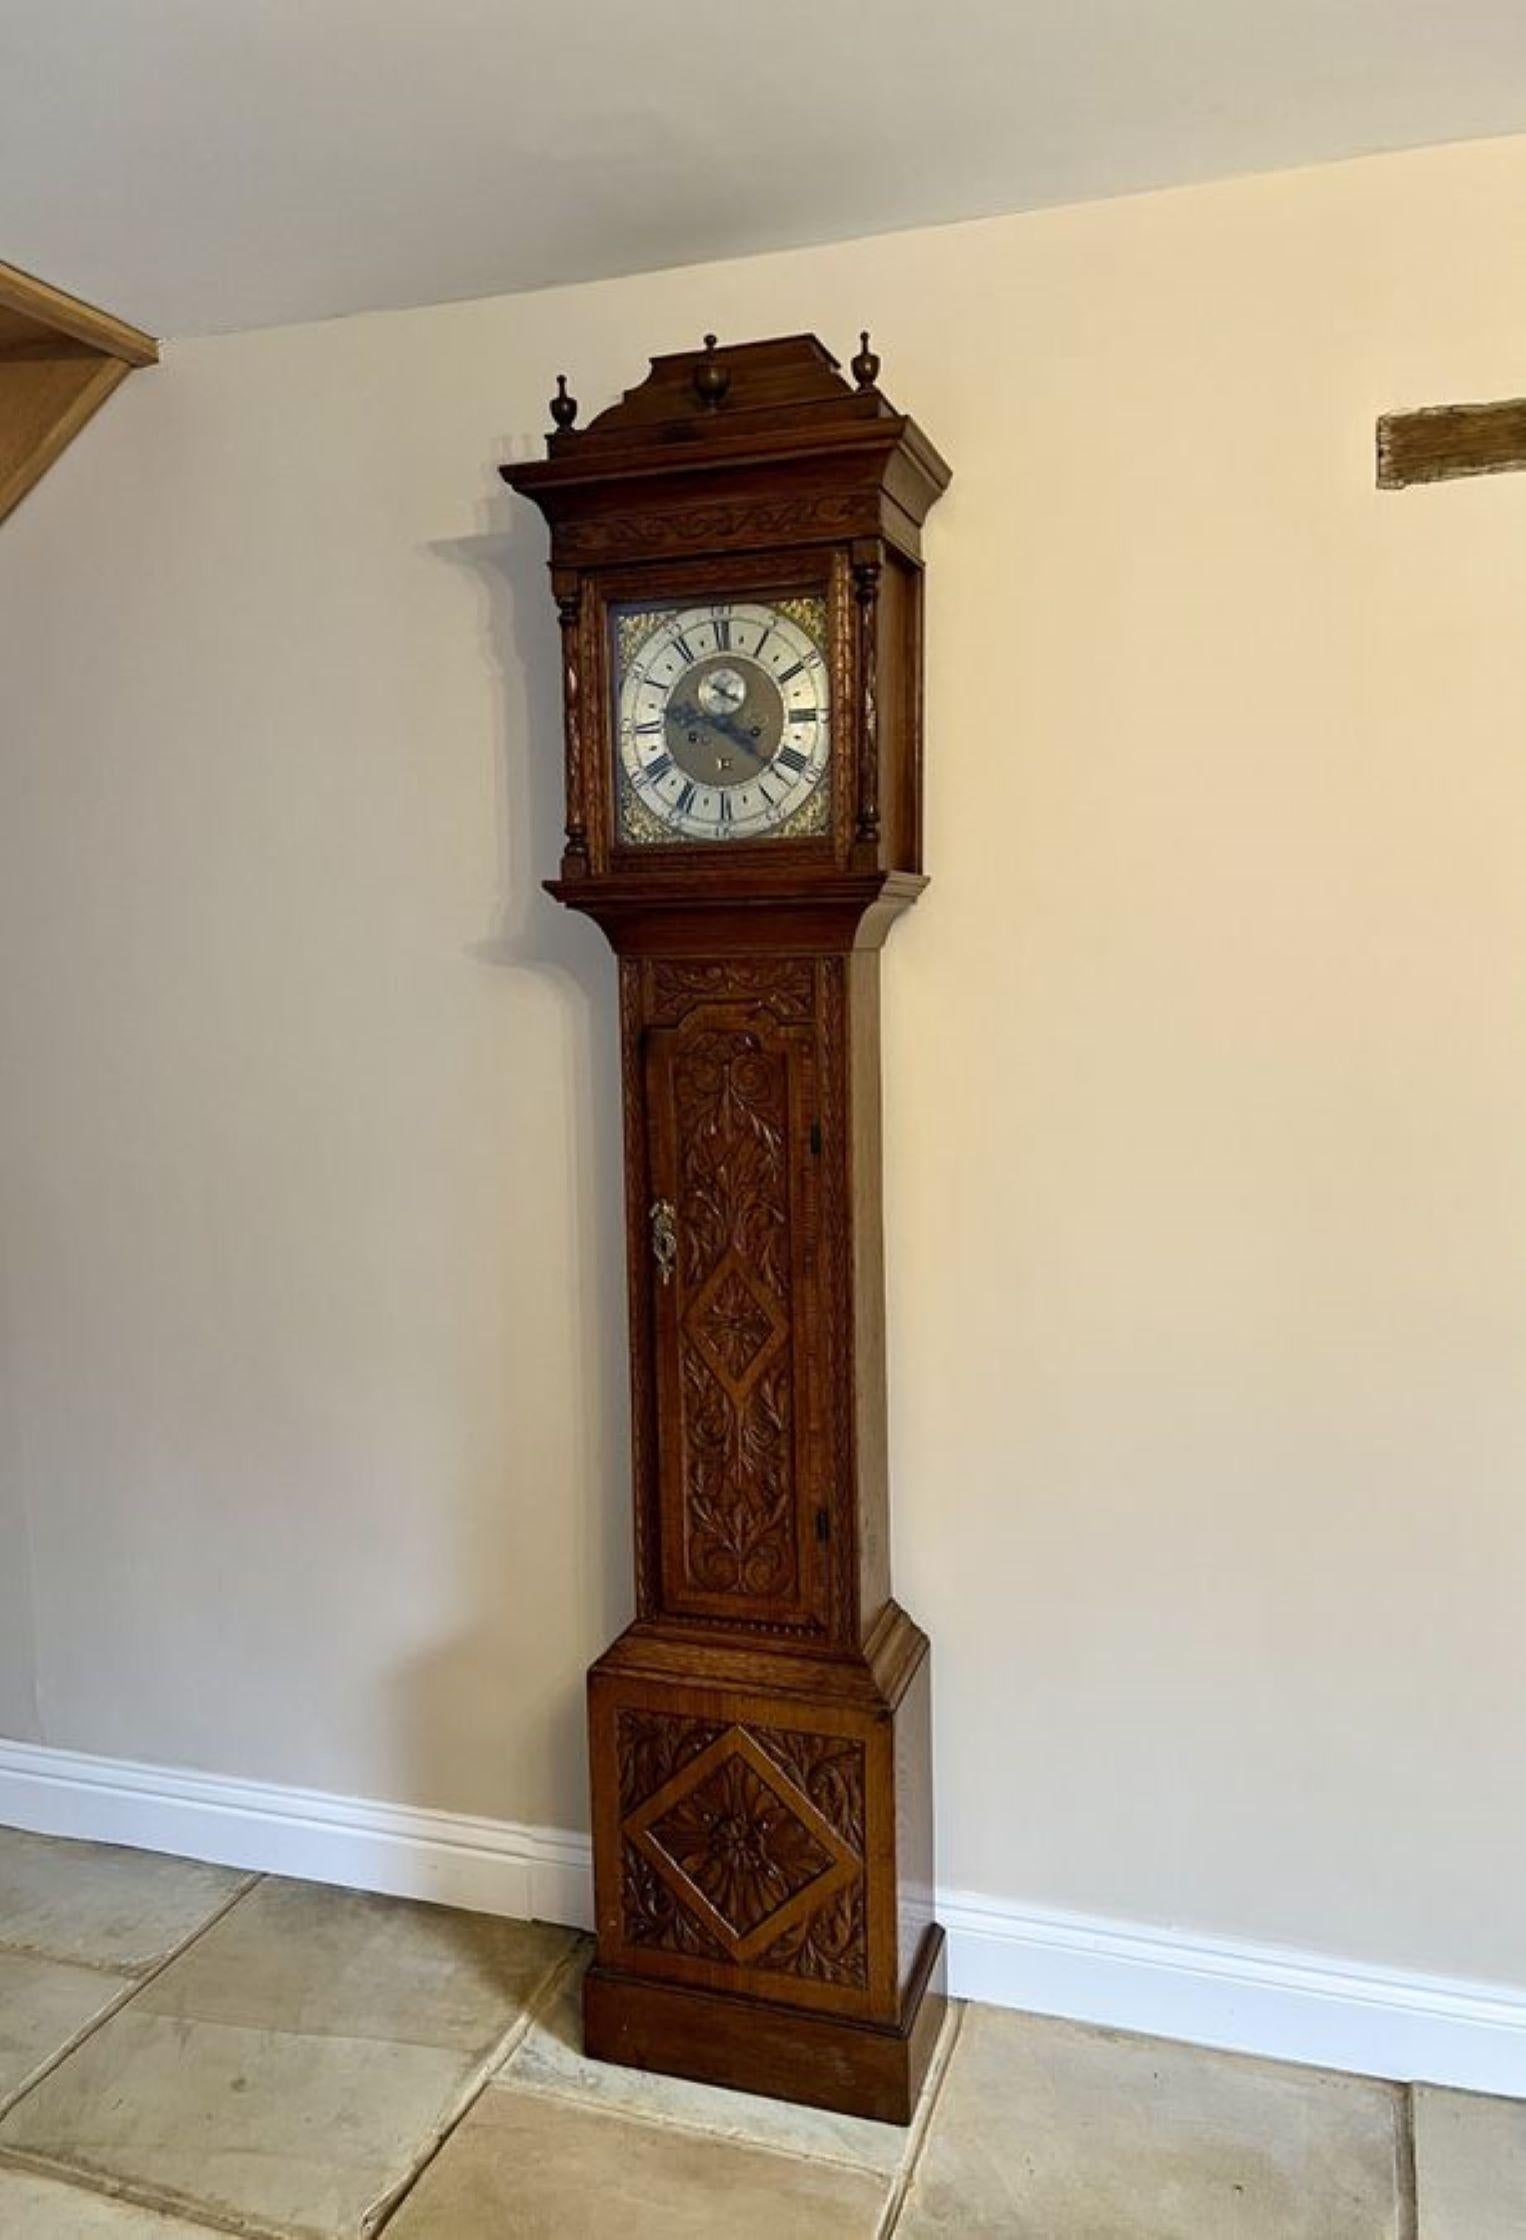 Outstanding quality 18th century carved oak long case clock by Smith Macclesfield, having an outstanding quality carved oak case with three finials to the top of the case, a brass face with a silvered dial and the original hands, signature signed,